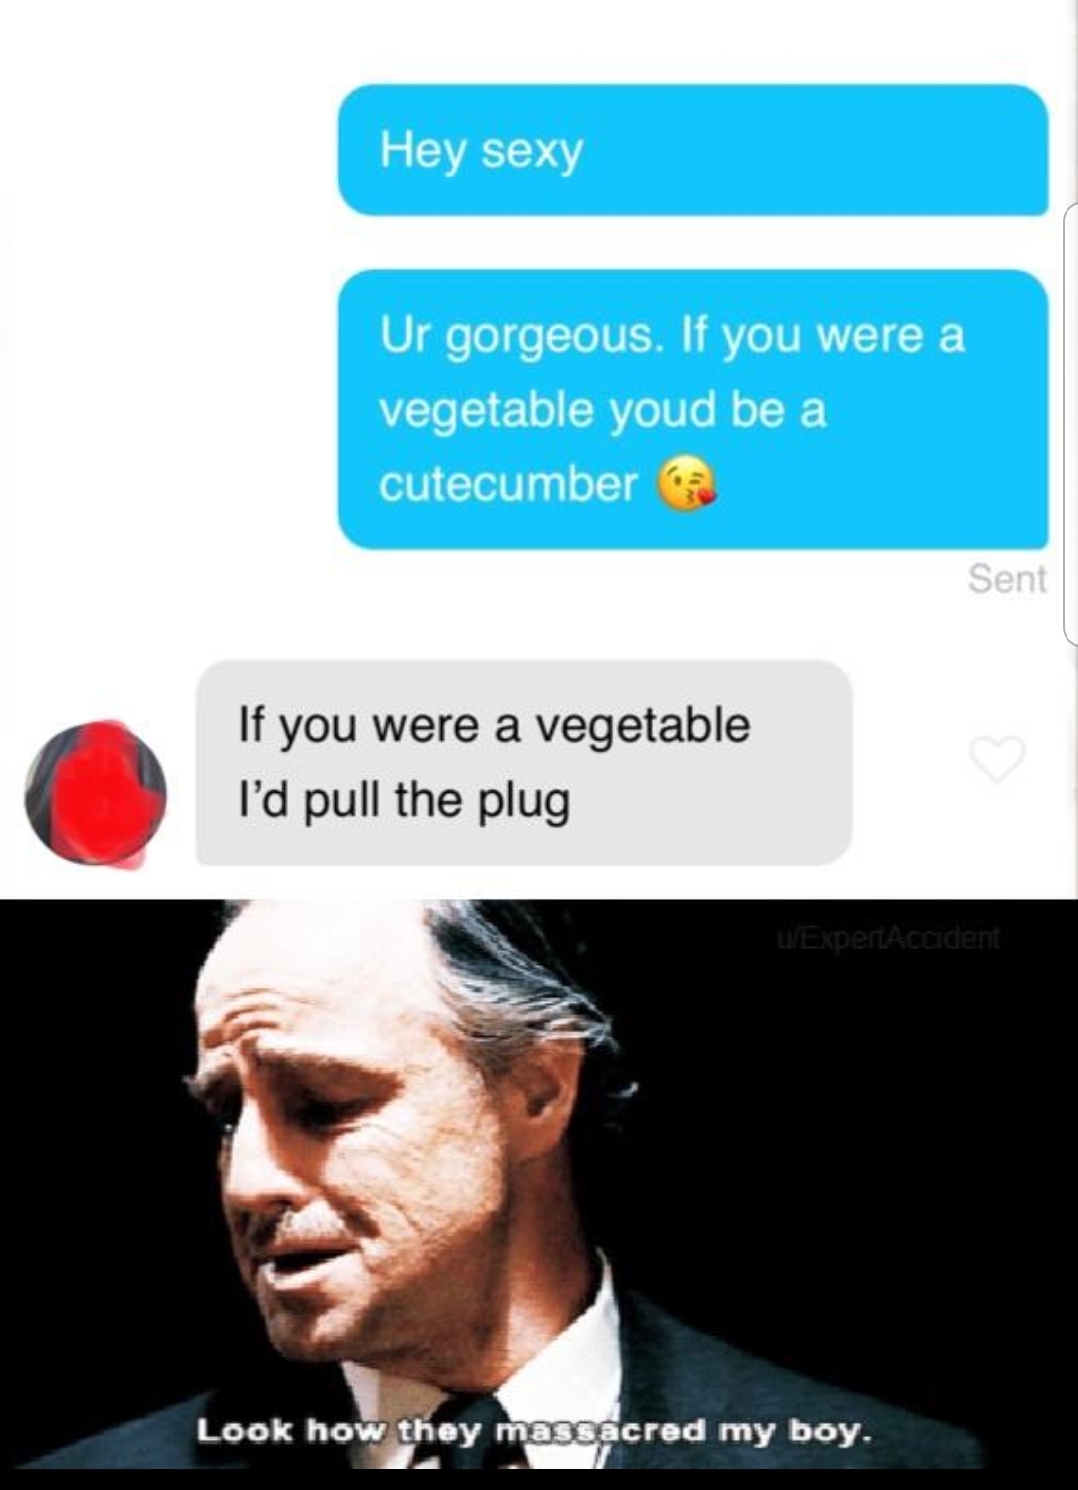 look how they massacred my boy meme - Hey sexy Ur gorgeous. If you were a vegetable youd be a cutecumber Sent If you were a vegetable l'd pull the plug uExpert Accident Look how they massacred my boy.